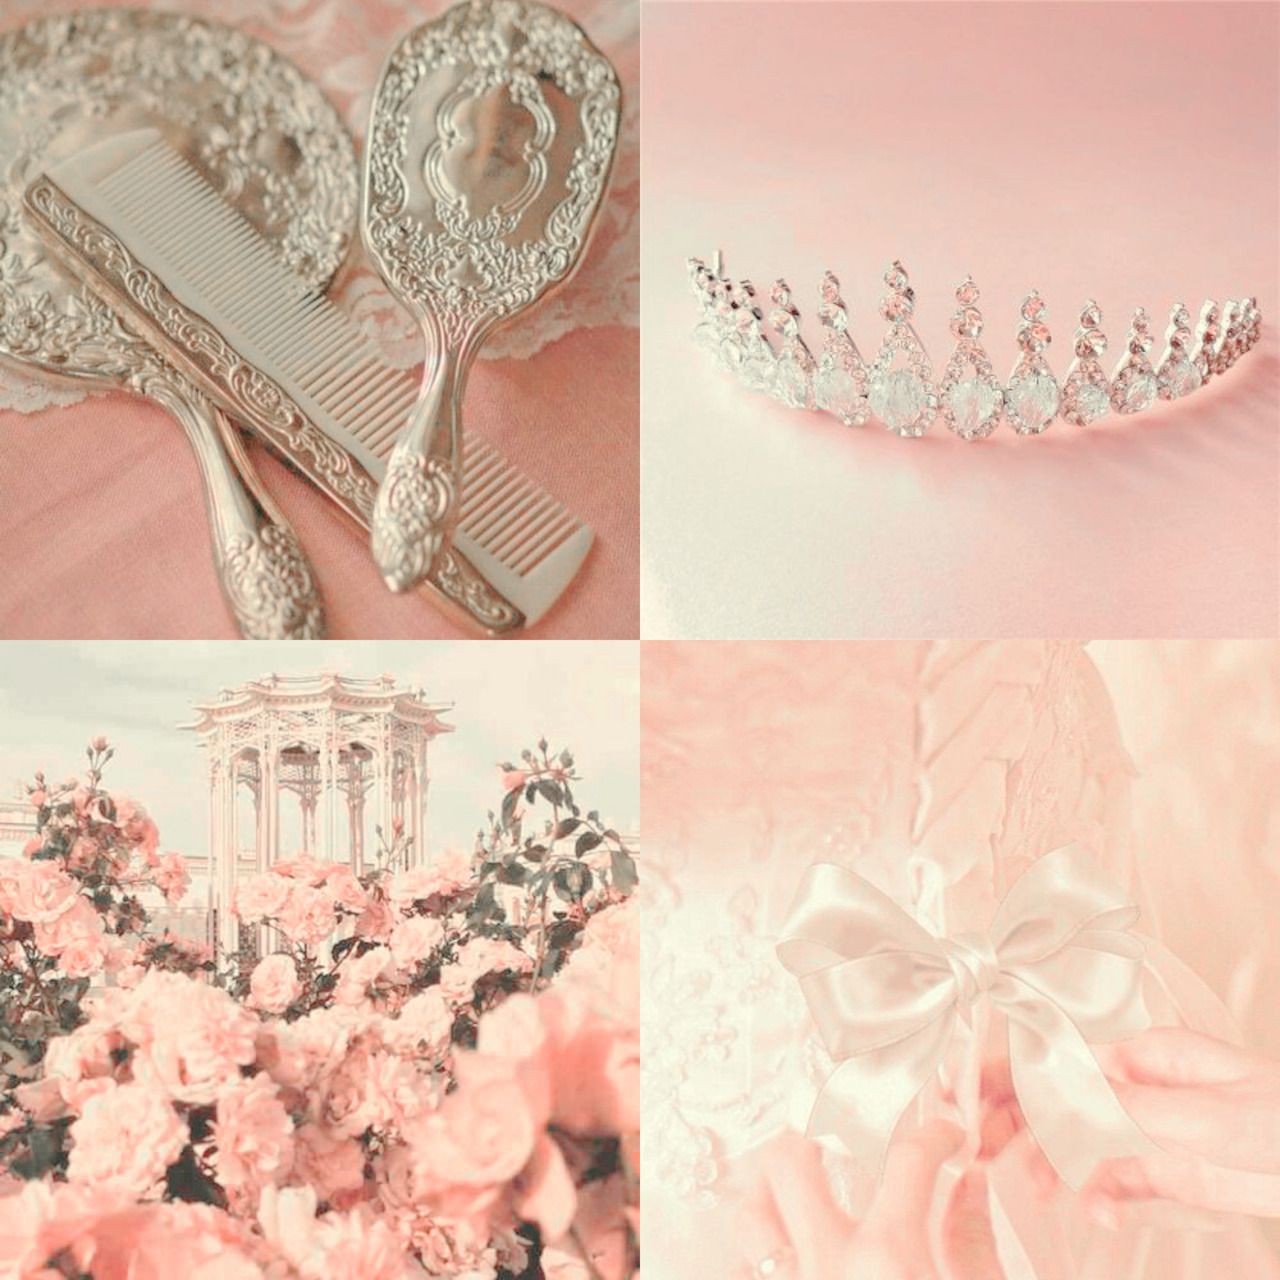 Aesthetic collage of a tiara, a vanity mirror, a pink rose bush, and a white bow - Royalcore